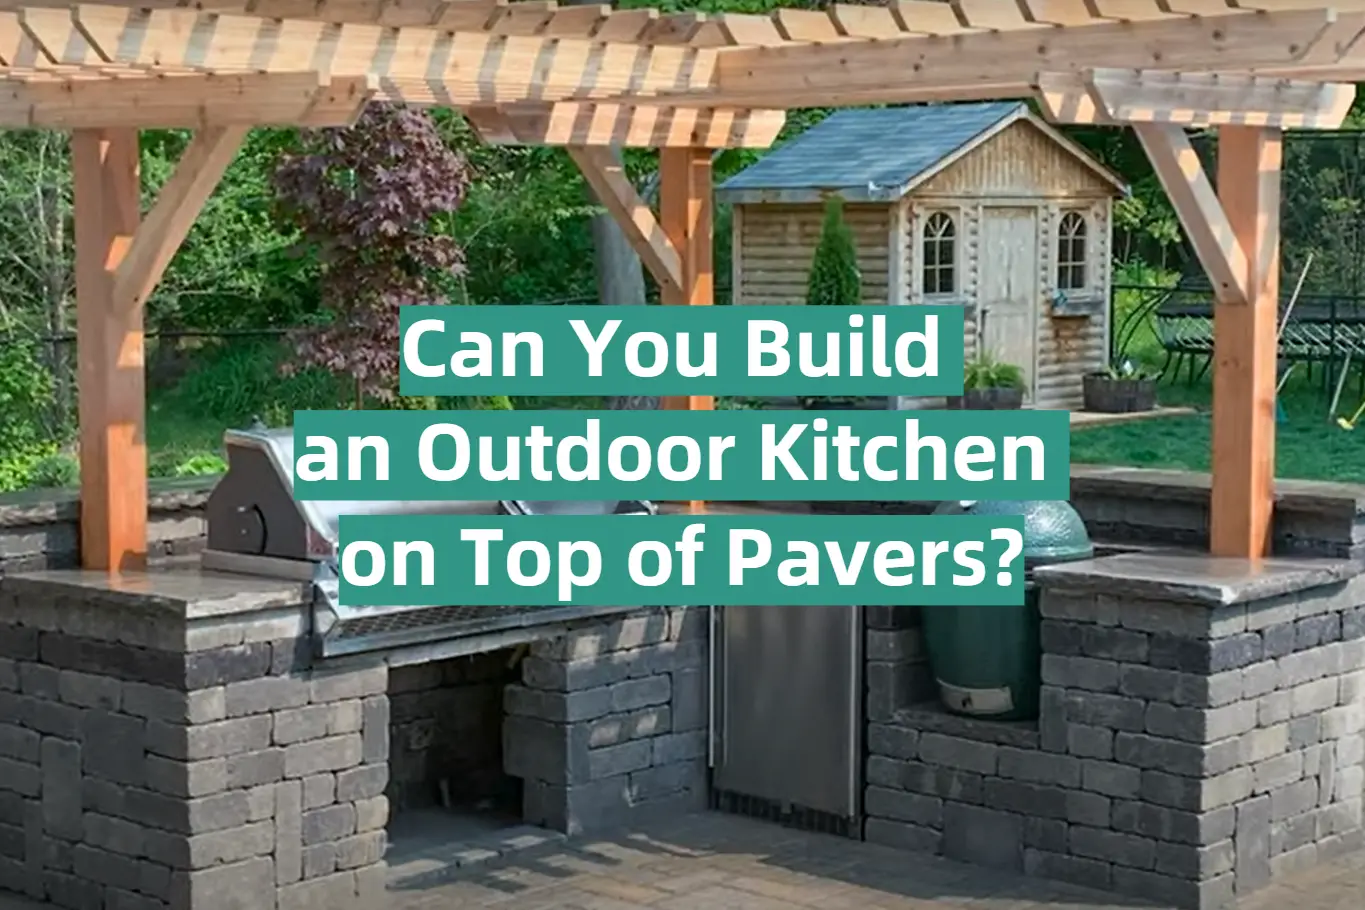 Can You Build an Outdoor Kitchen on Top of Pavers?